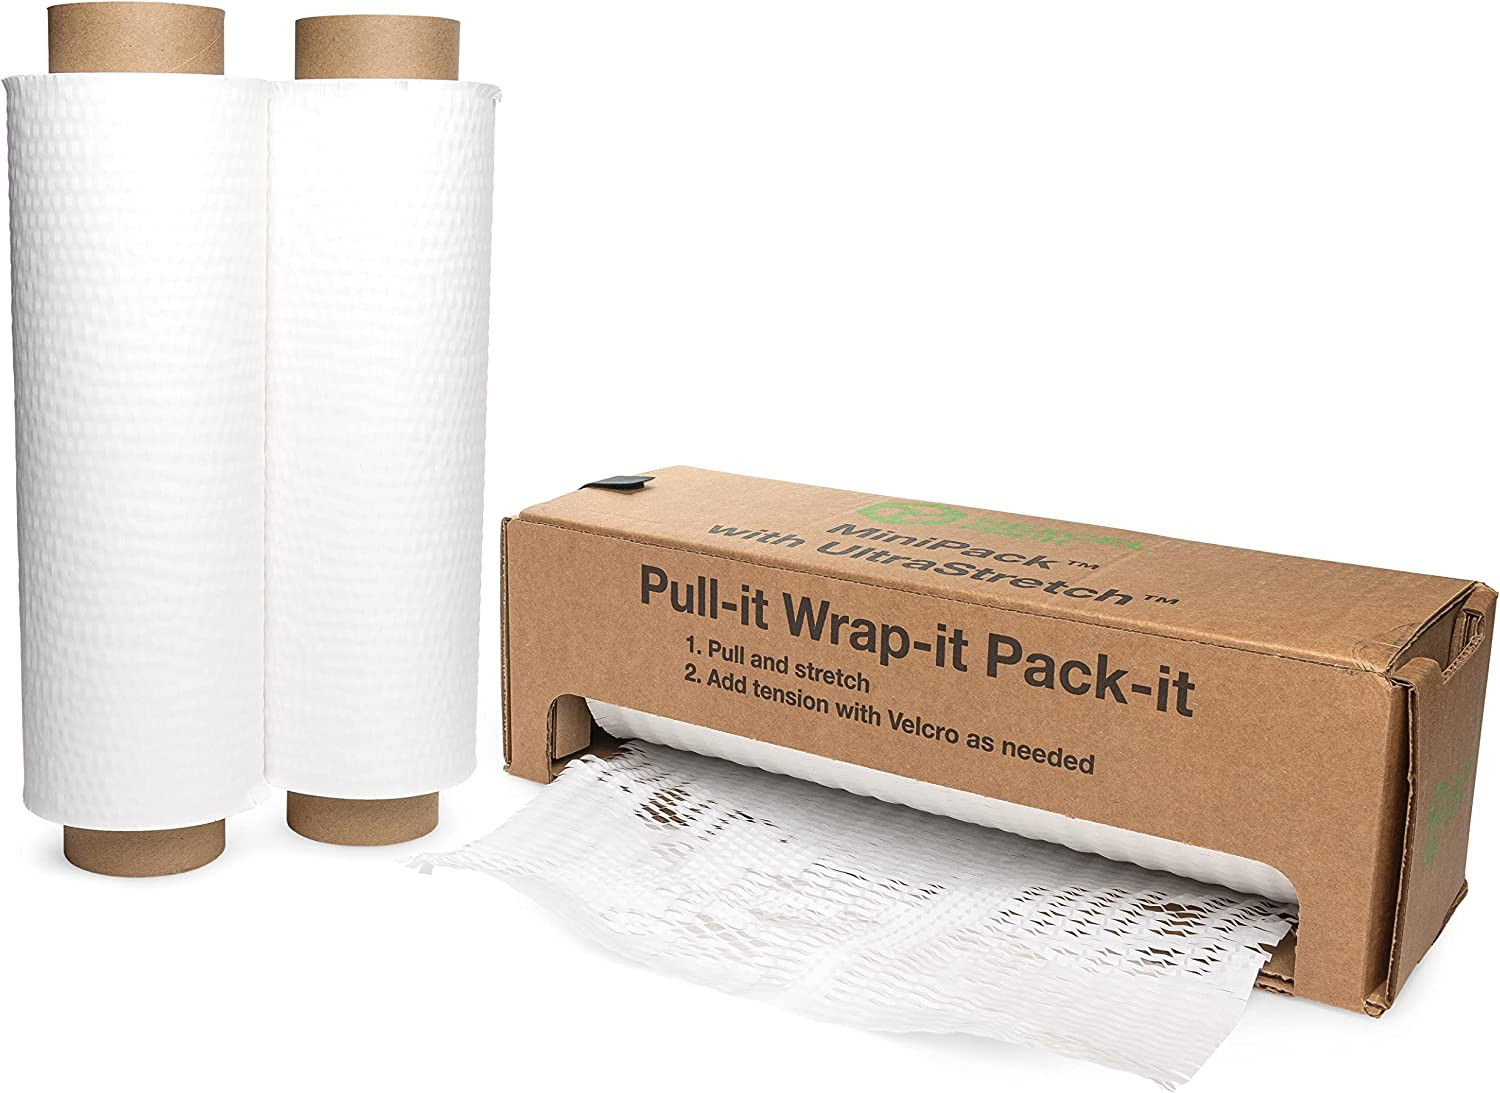 Honeycomb Packing Paper Set, 15.25 x 300', White buy in stock in